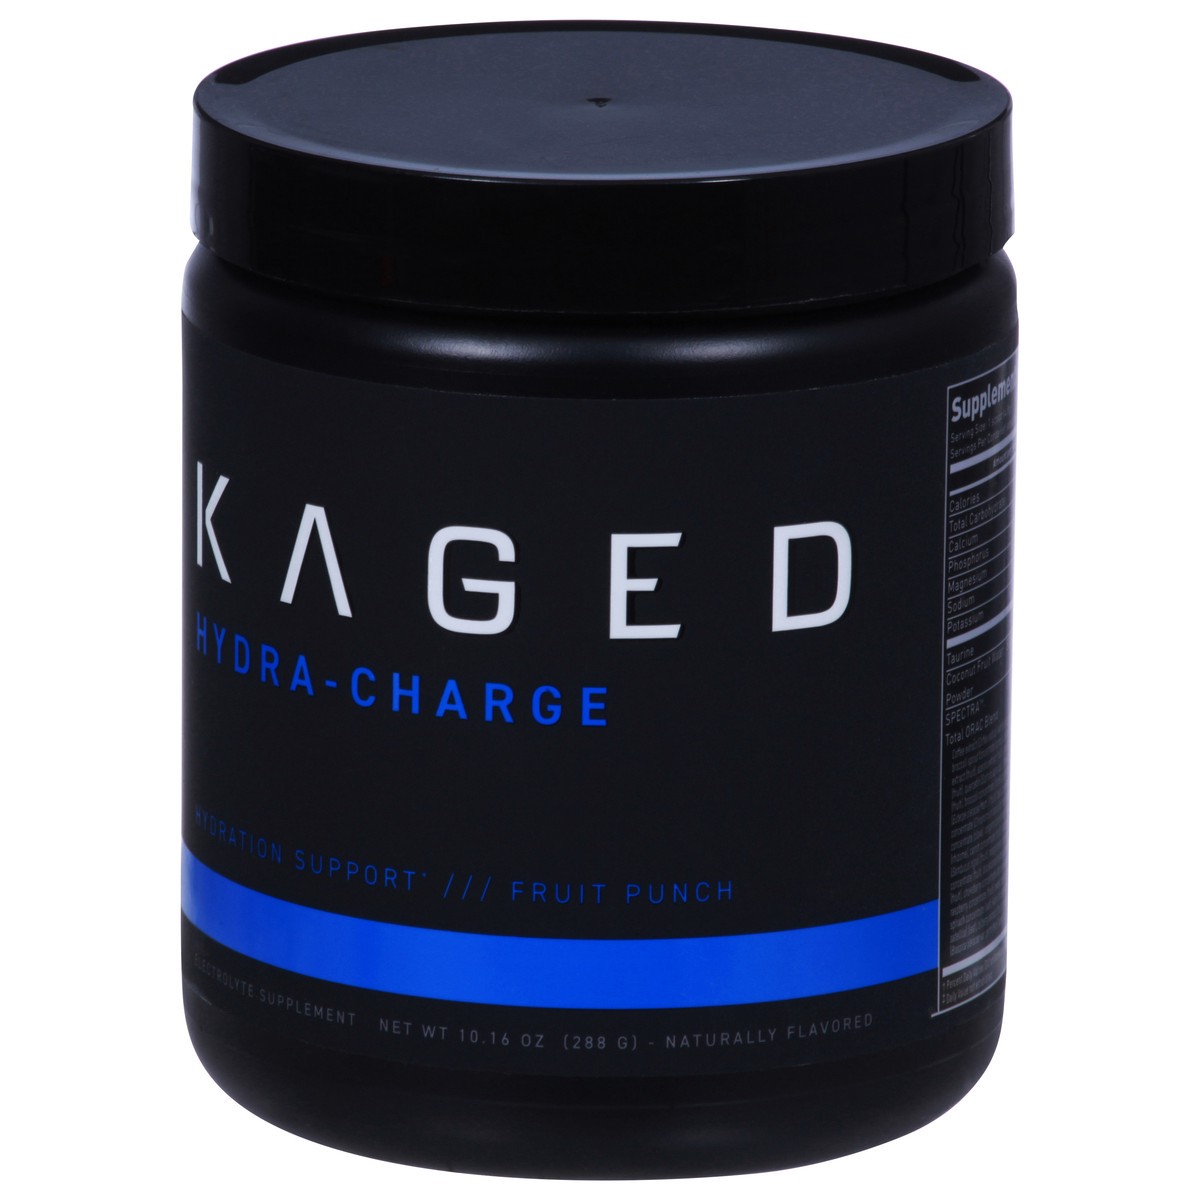 slide 11 of 12, Kaged Hydra-Charge Fruit Punch Hydration Support 10.16 oz, 9.73 oz